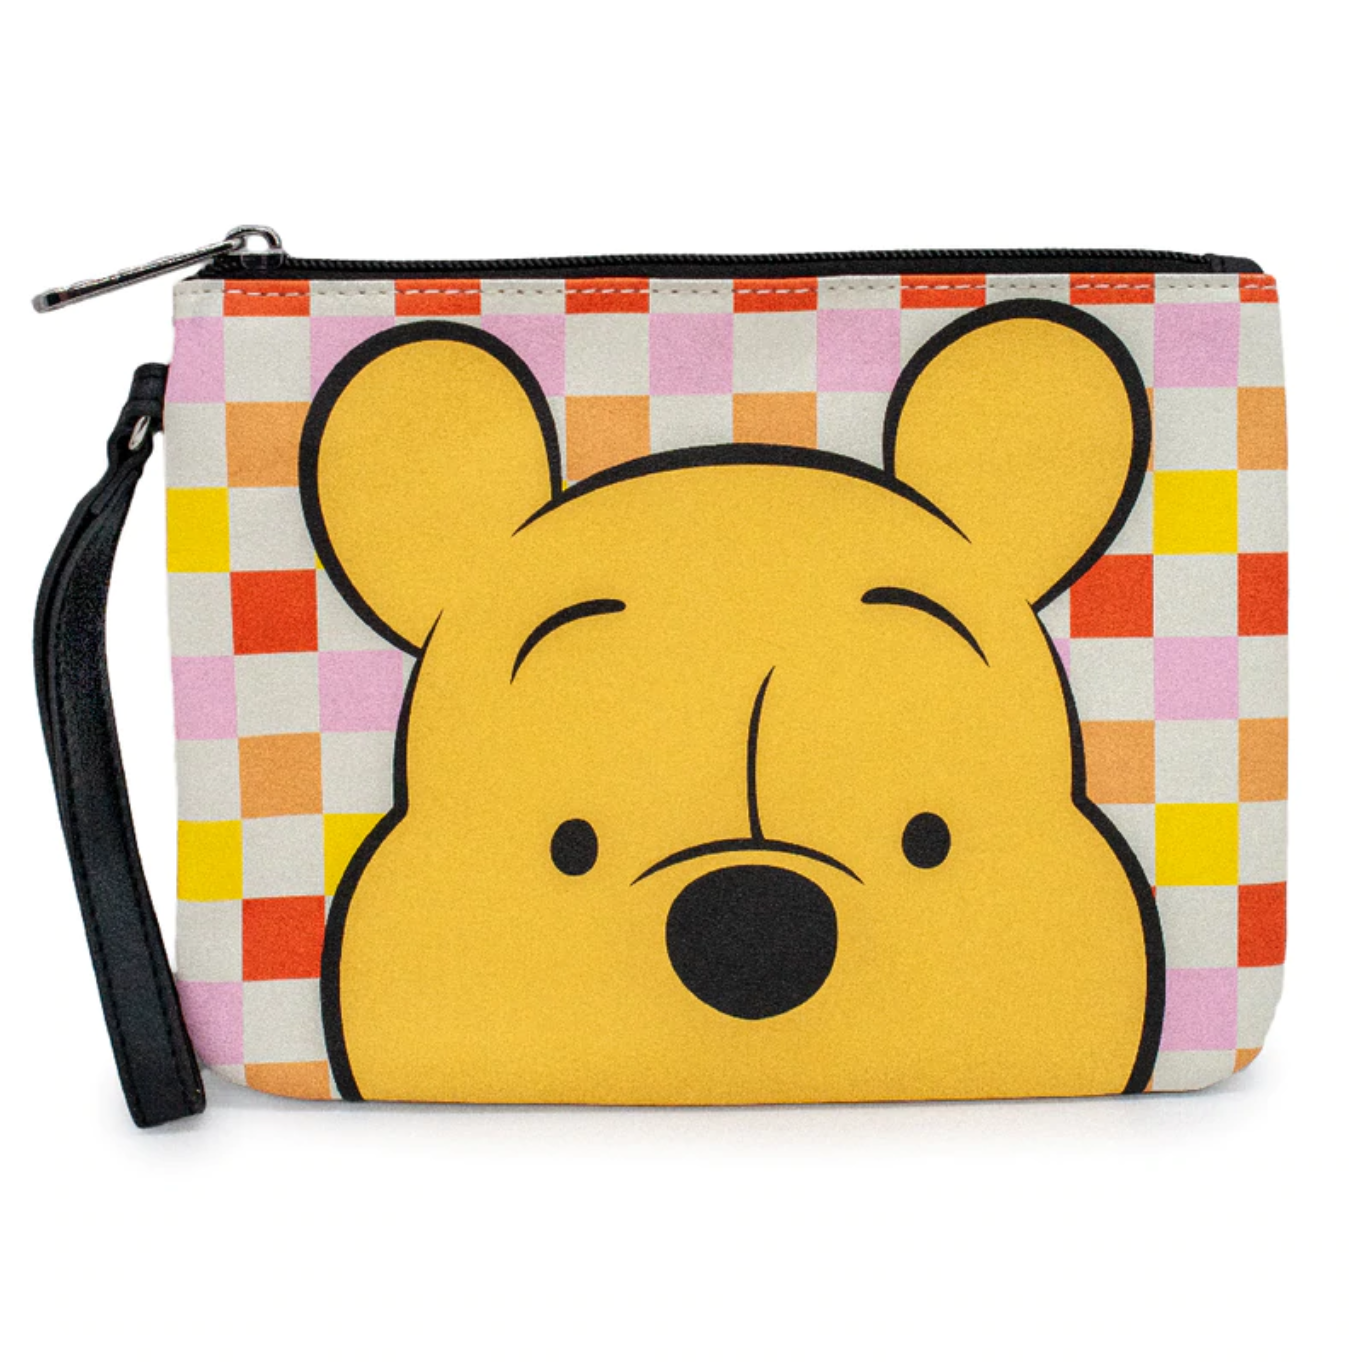 Disney Winnie The Pooh Single Pocket Wristlet.  Available at Blue Culture Tees